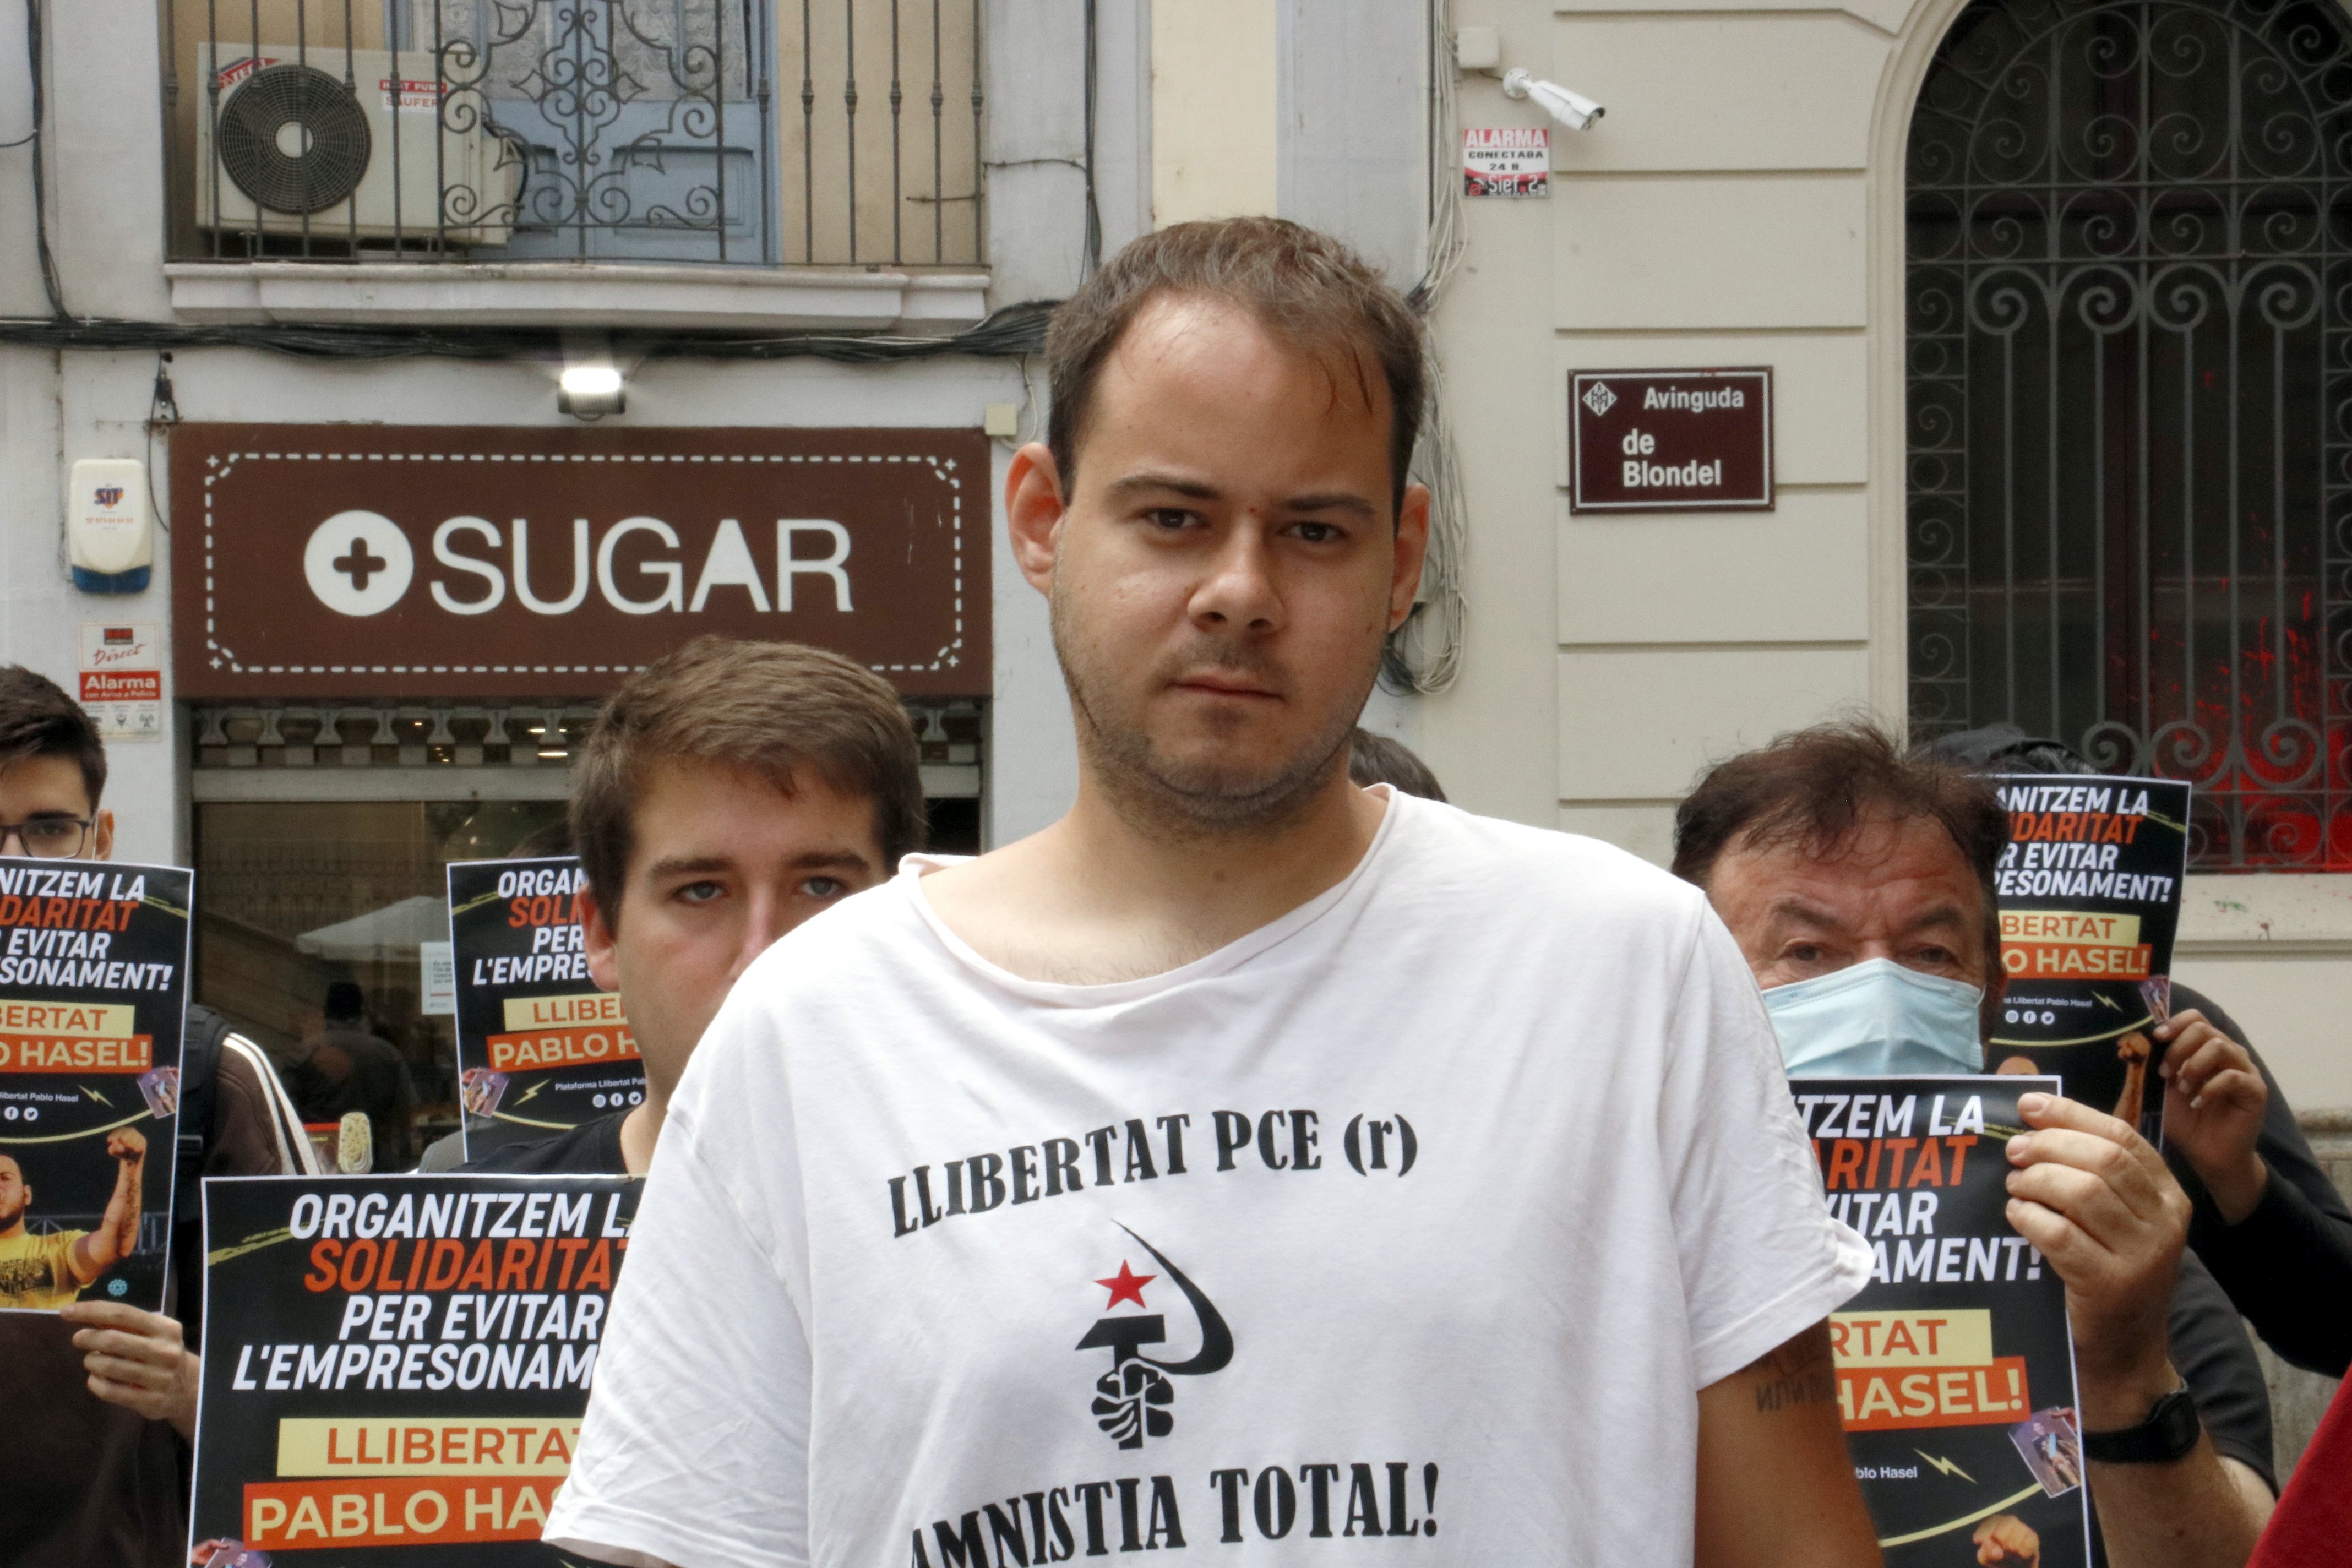 Hasél: "The Spanish government breaks its promises, the 'Gag Law' has been extended"